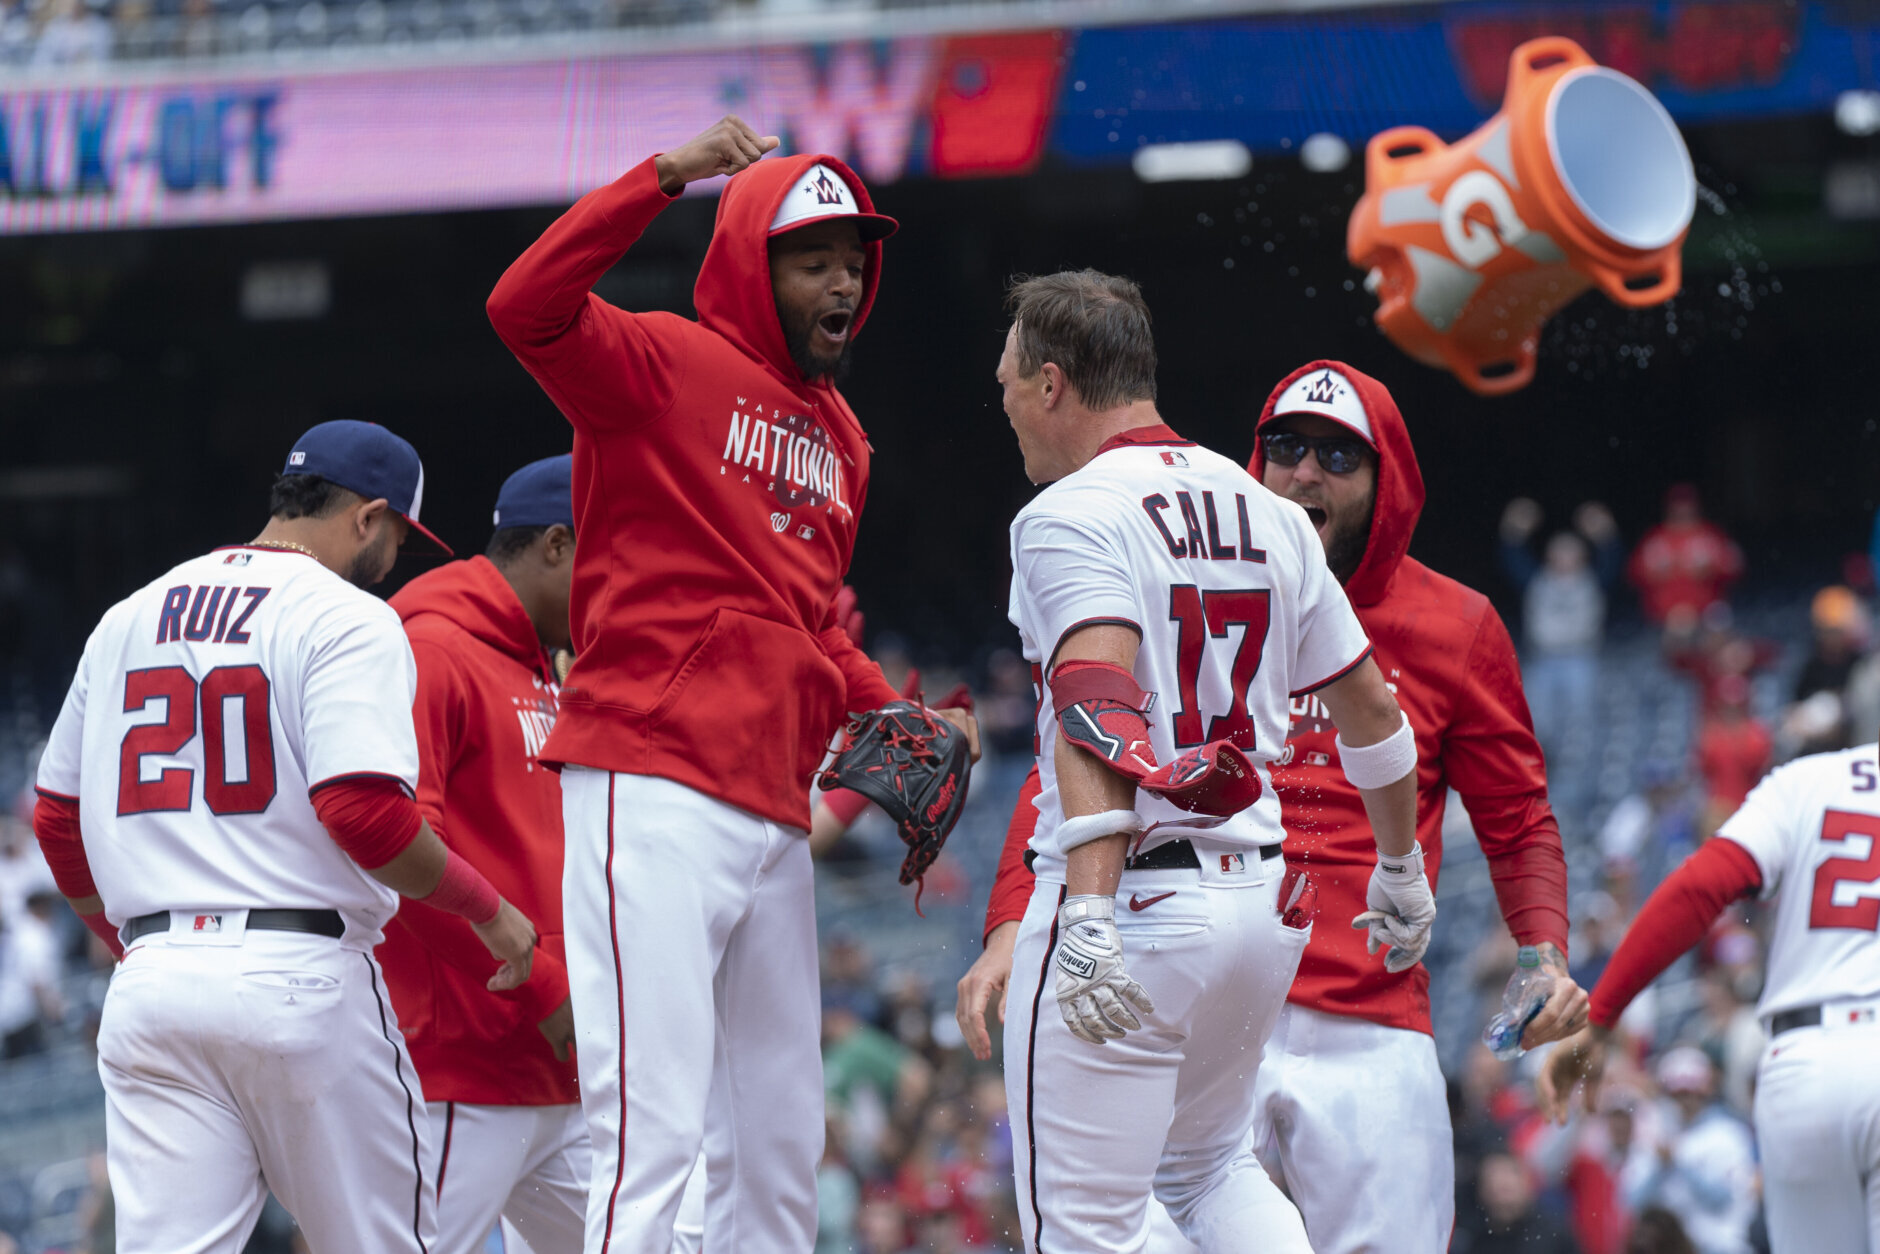 Call's walk-off homer gives Nationals 4-3 win over Cubs - WTOP News